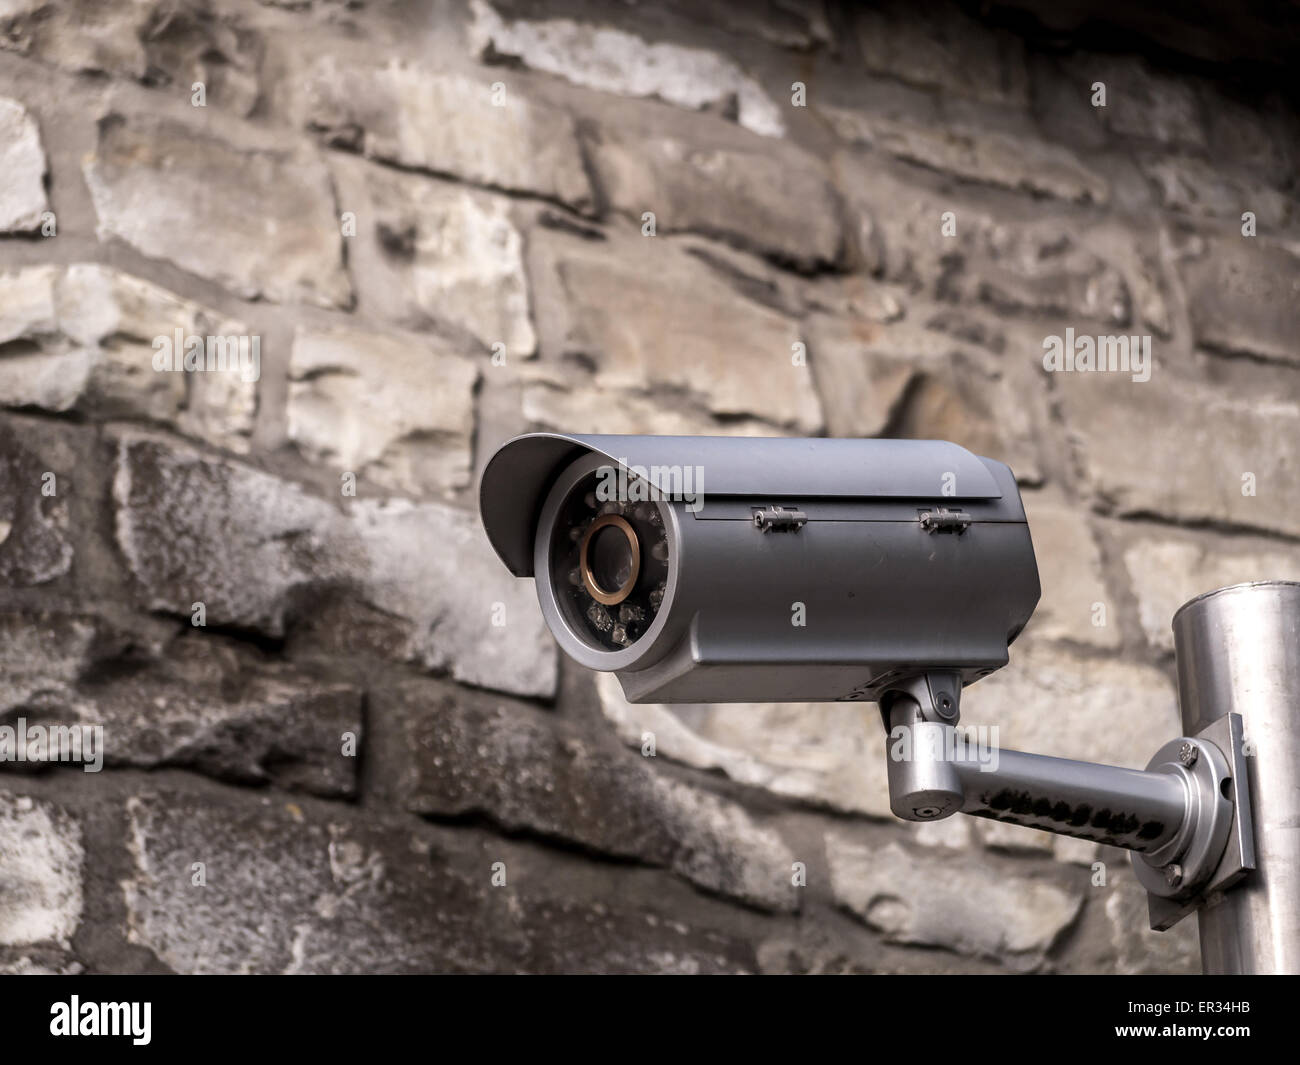 Security cctv camera fixed to the wall Stock Photo